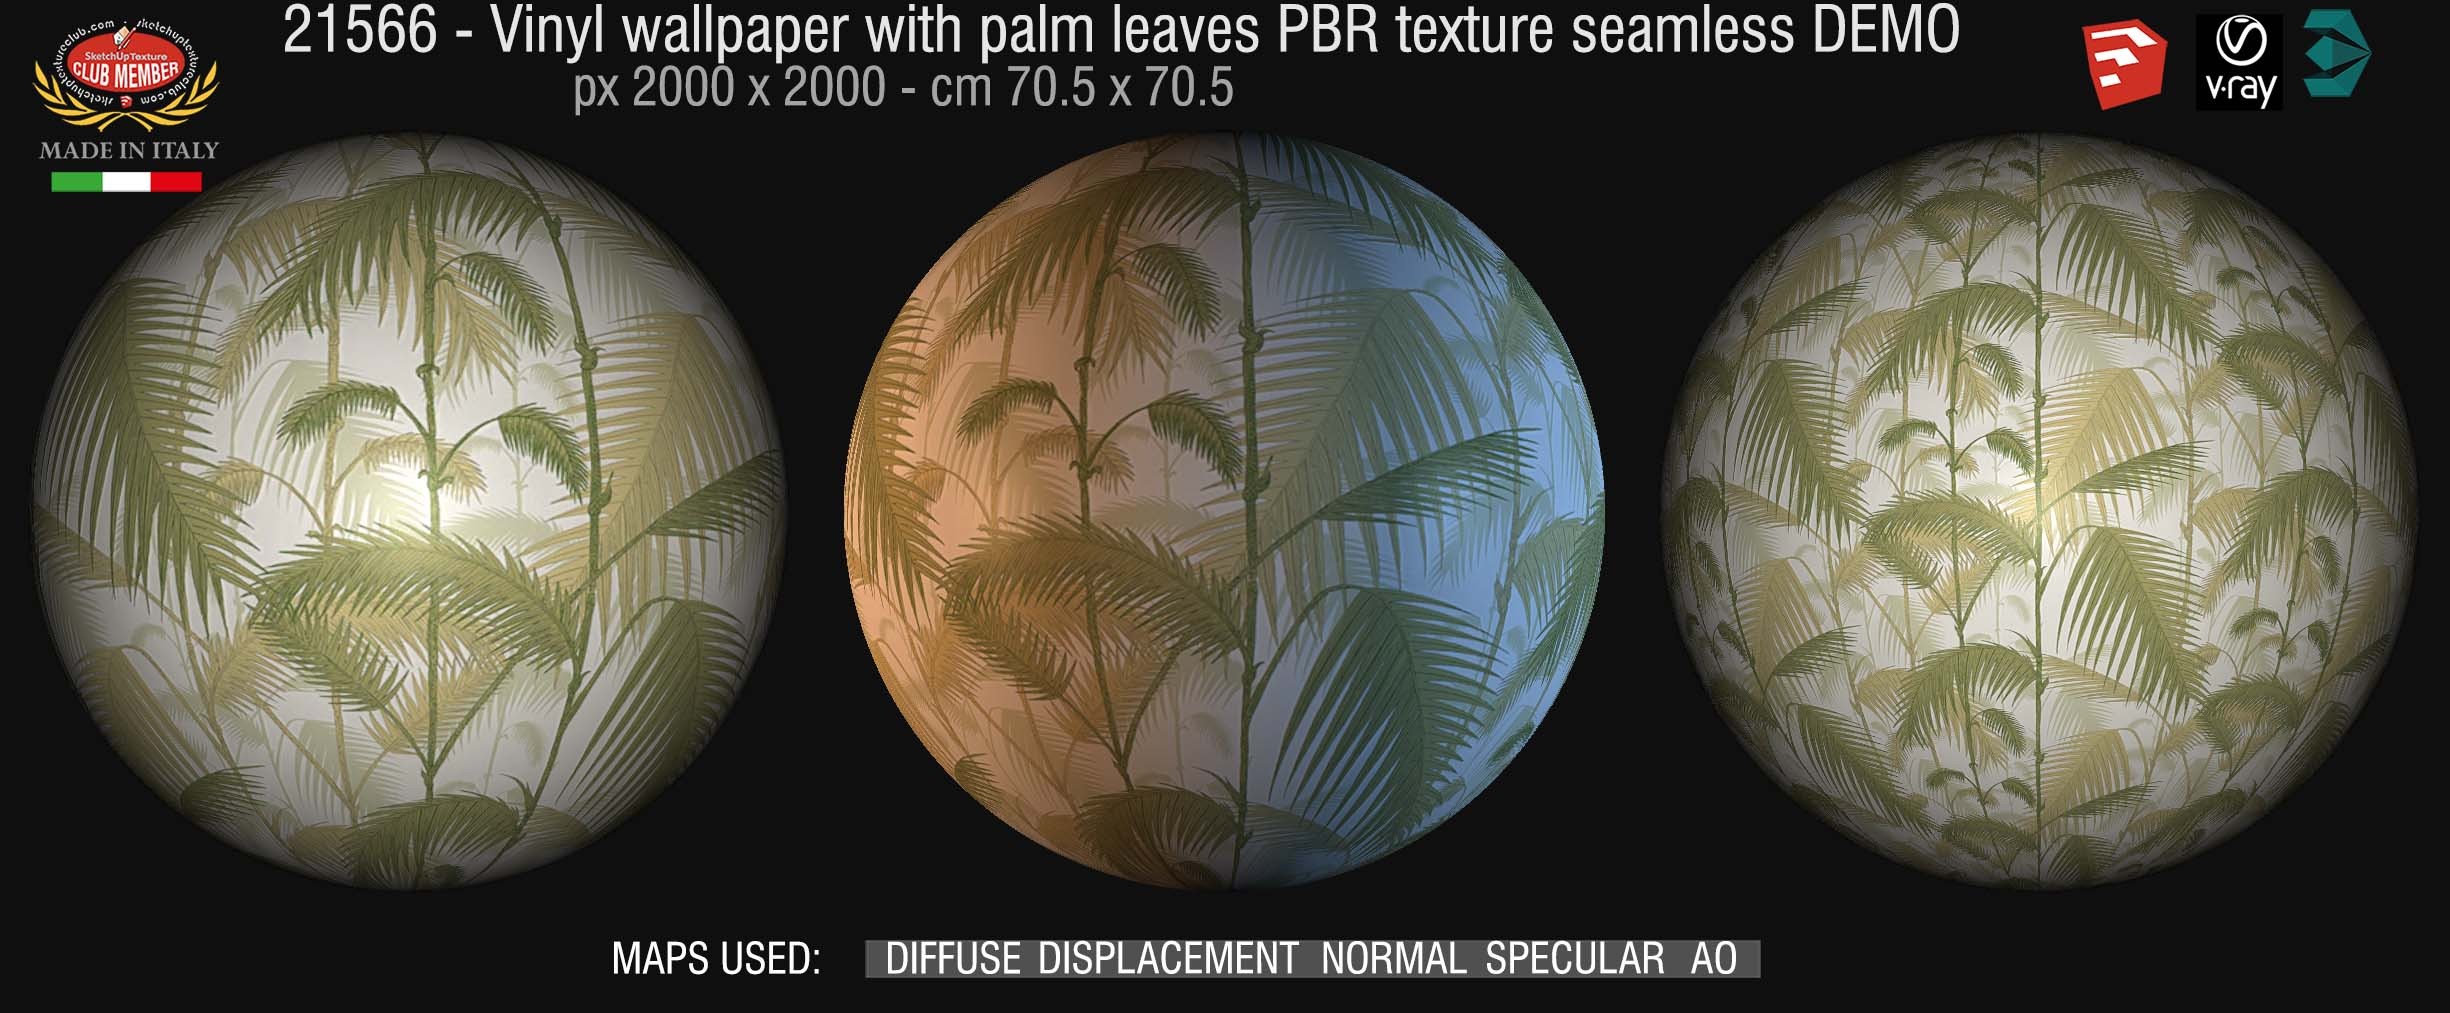 21566 Vinyl wallpaper with palm leaves PBR texture-seamless DEMO